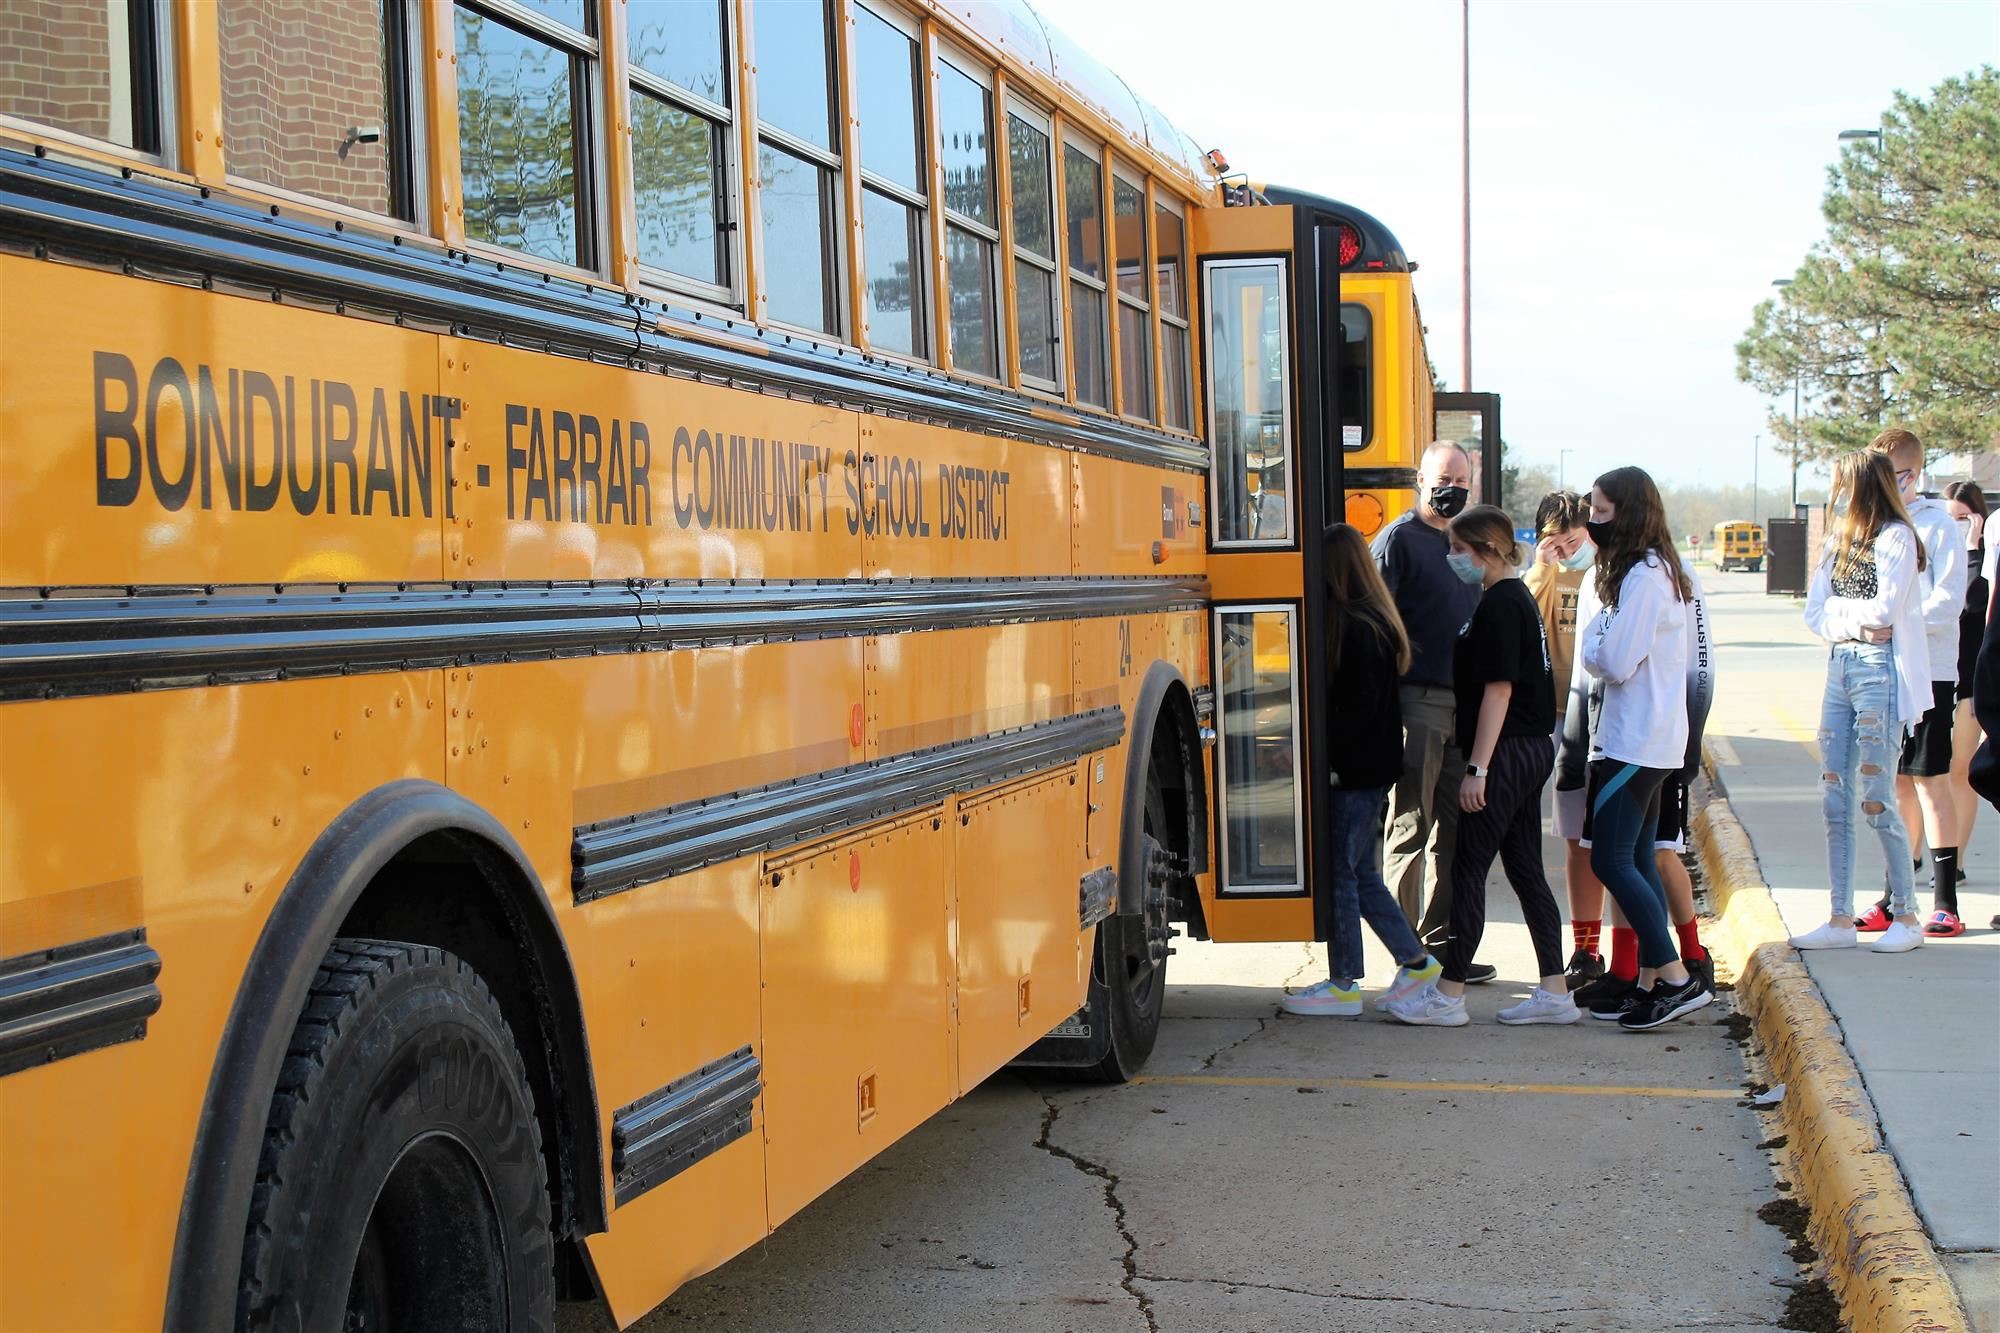 Middle school students boarding a bus in preparation for evacuation drills